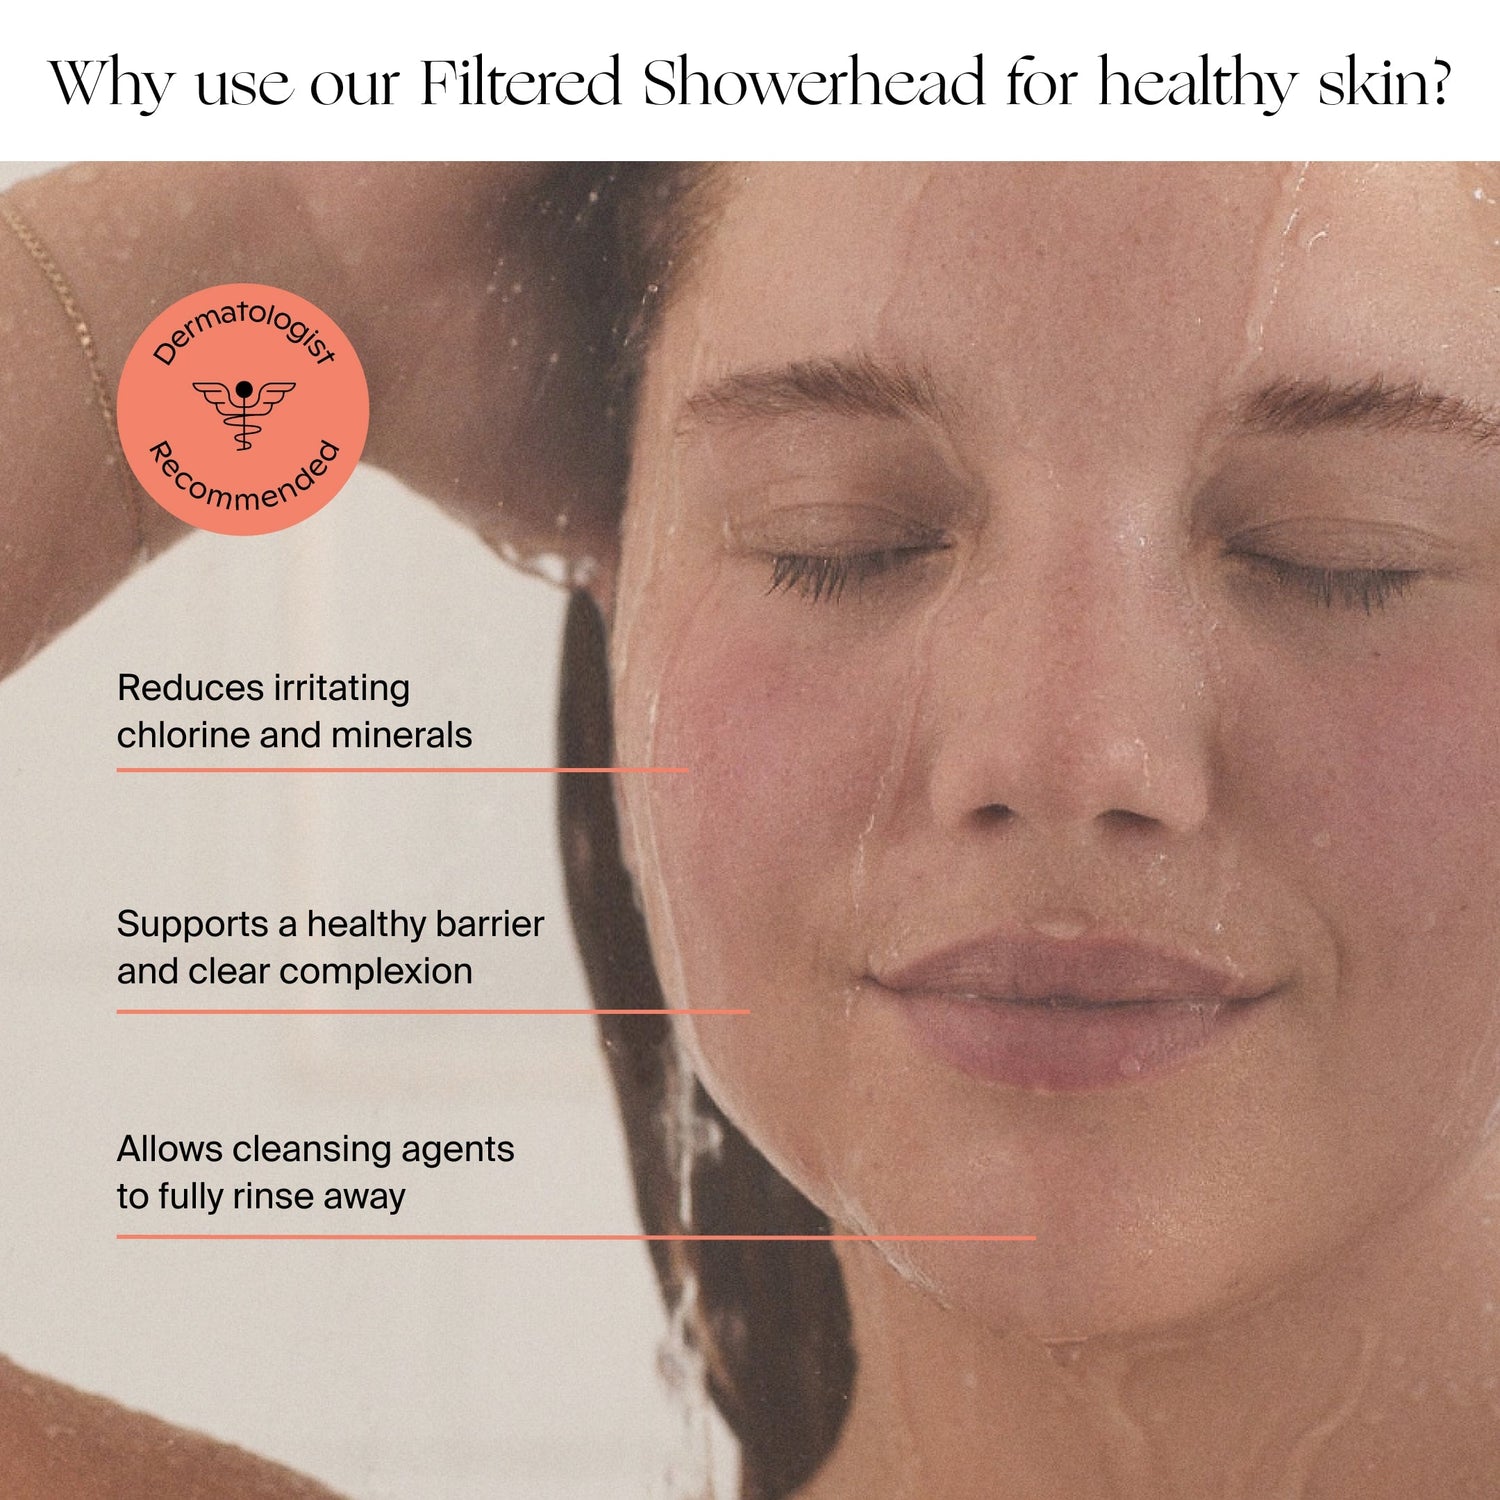 Filtered Showerhead | Lifestyle, Why use our Filtered Showerhead for healthy skin?